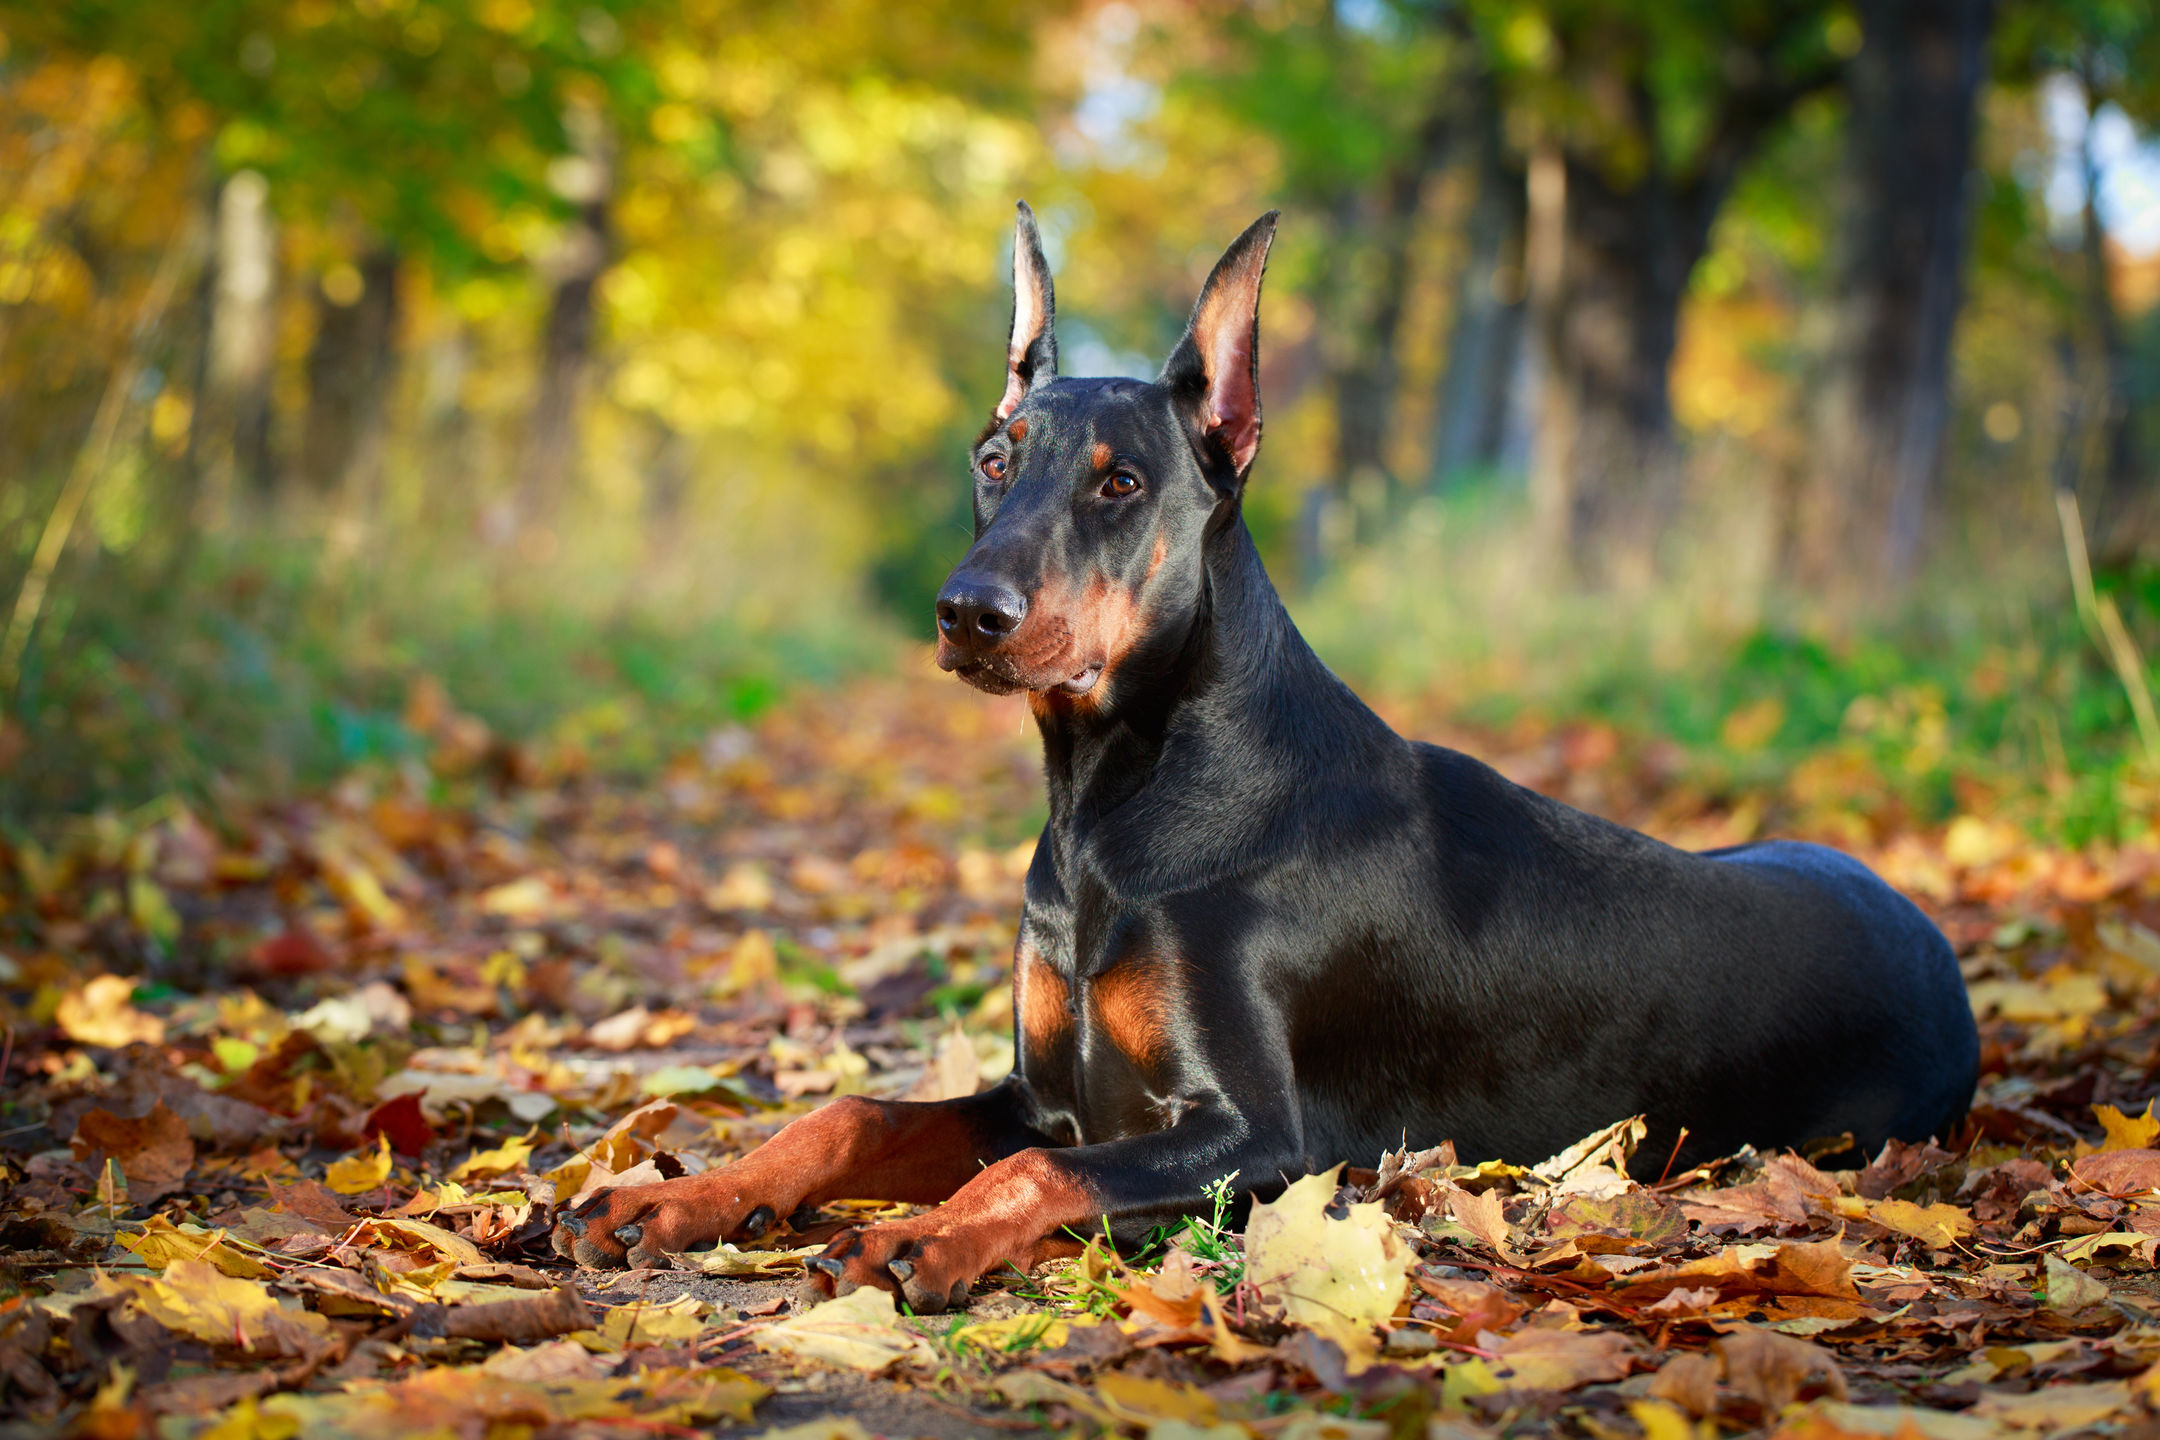  Doberman Puppies for Sale at Best Price